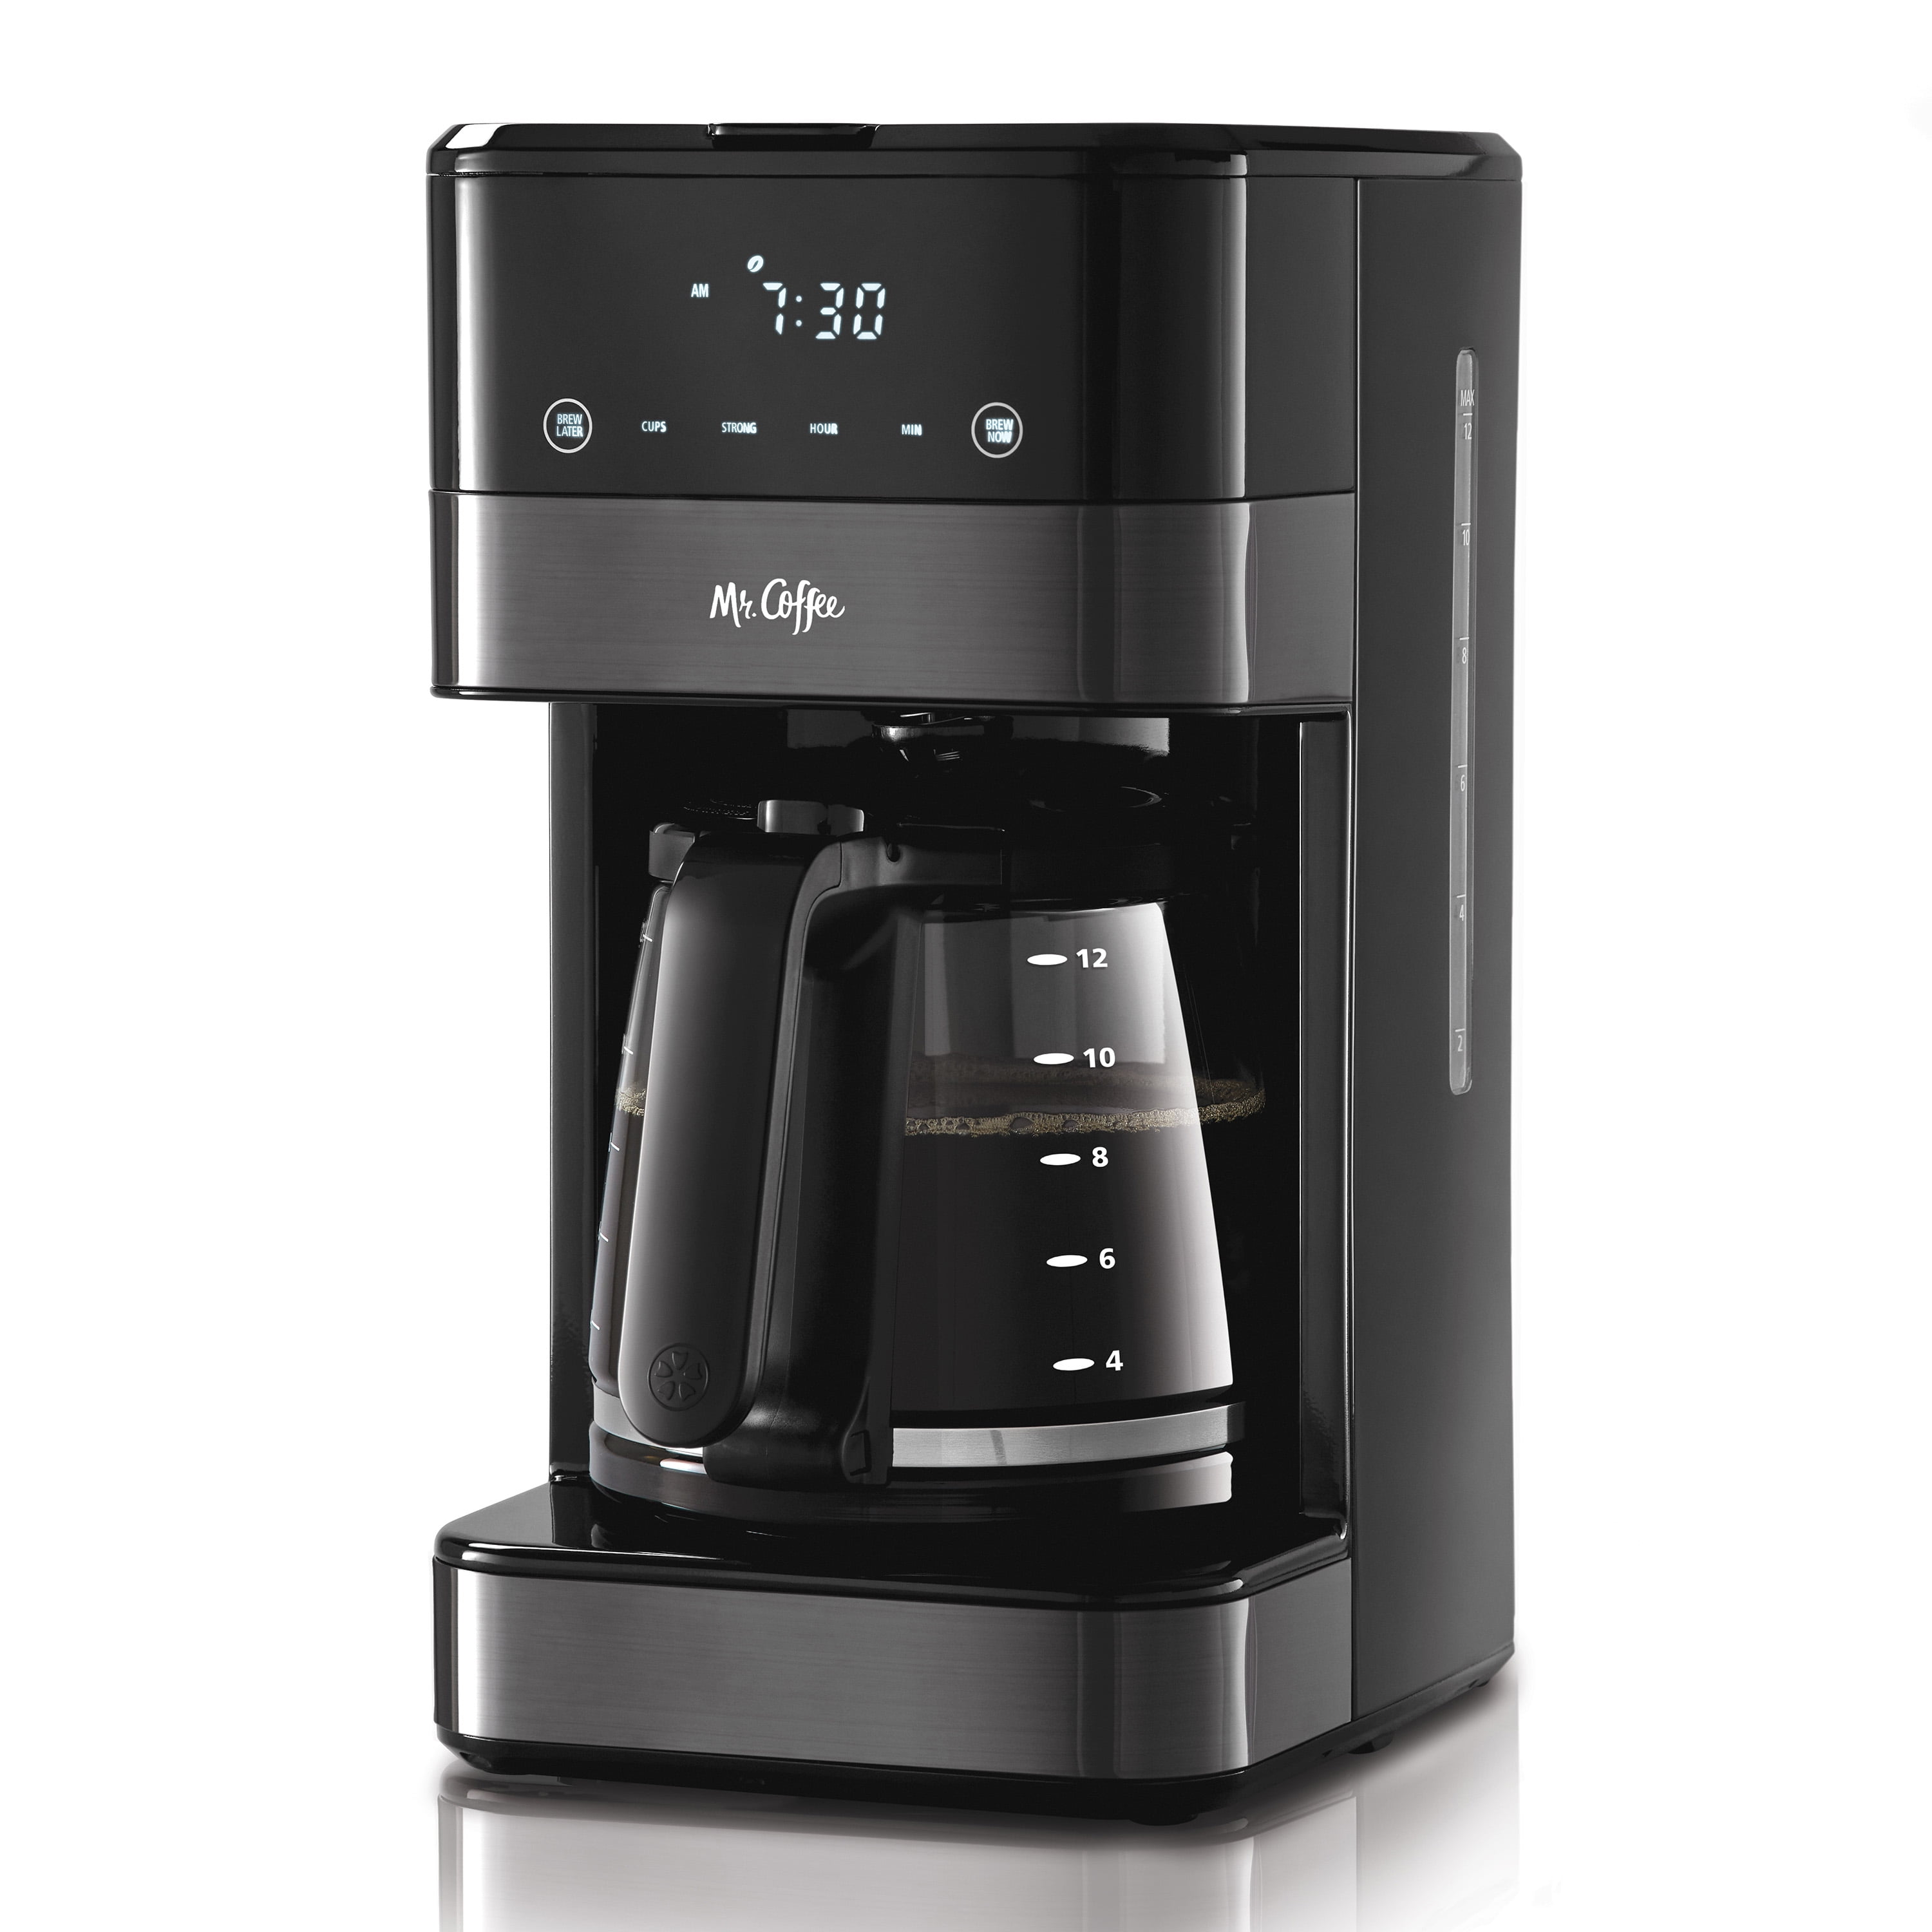 Mr, coffee Rapid Brew 12- cup programmable coffee maker - Furniture -  Cleveland, Ohio, Facebook Marketplace